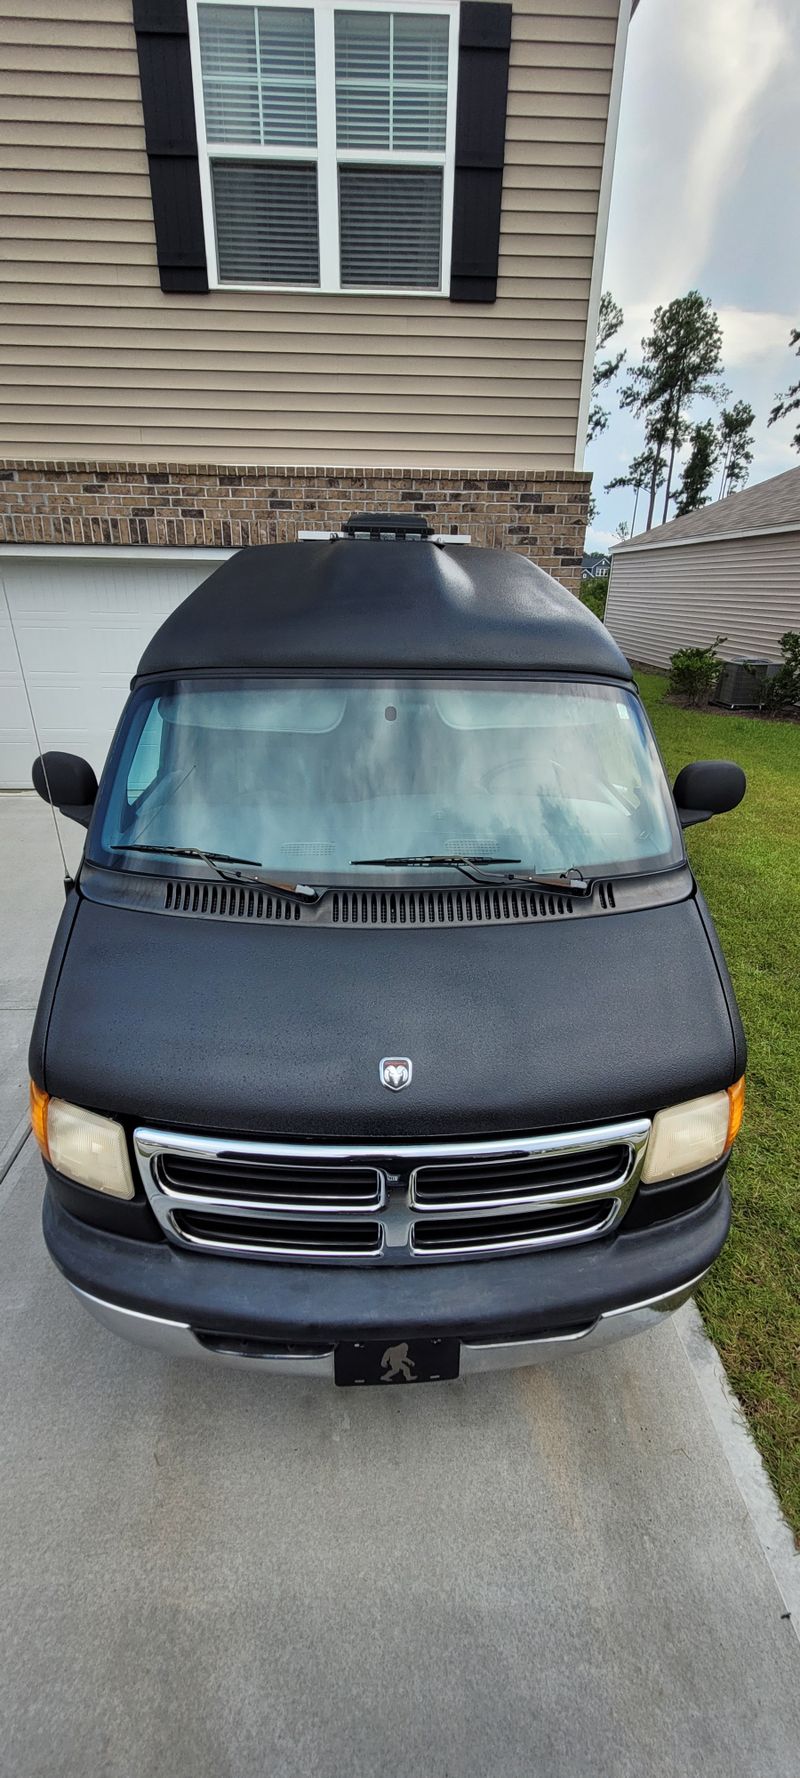 Picture 3/20 of a 1999 Ram Van Mark iii Conversion for sale in Summerville, South Carolina